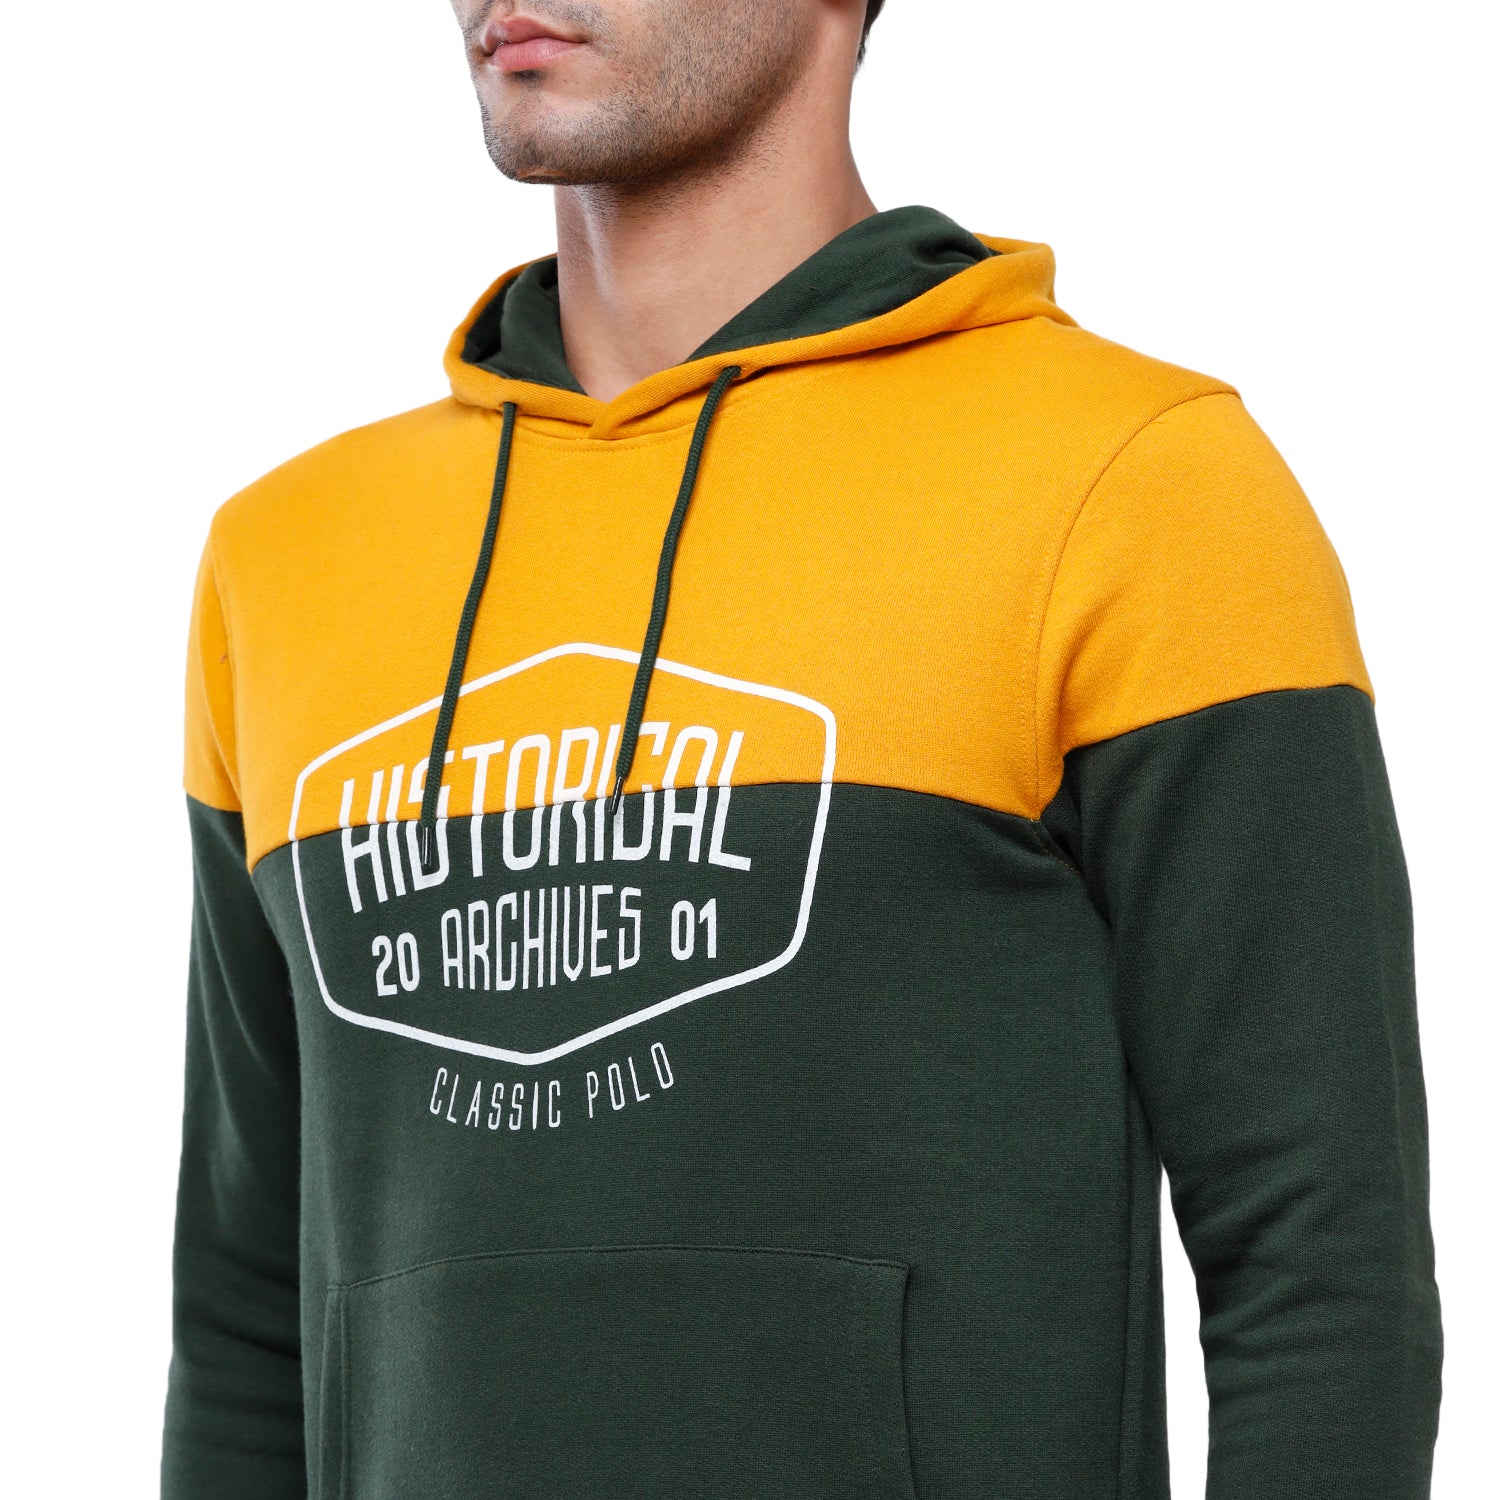 Classic Polo Men's Color Block Full Sleeve Yellow & Green Hooded Sweat Shirt - CPSS-335 A Sweat Shirts Classic Polo 